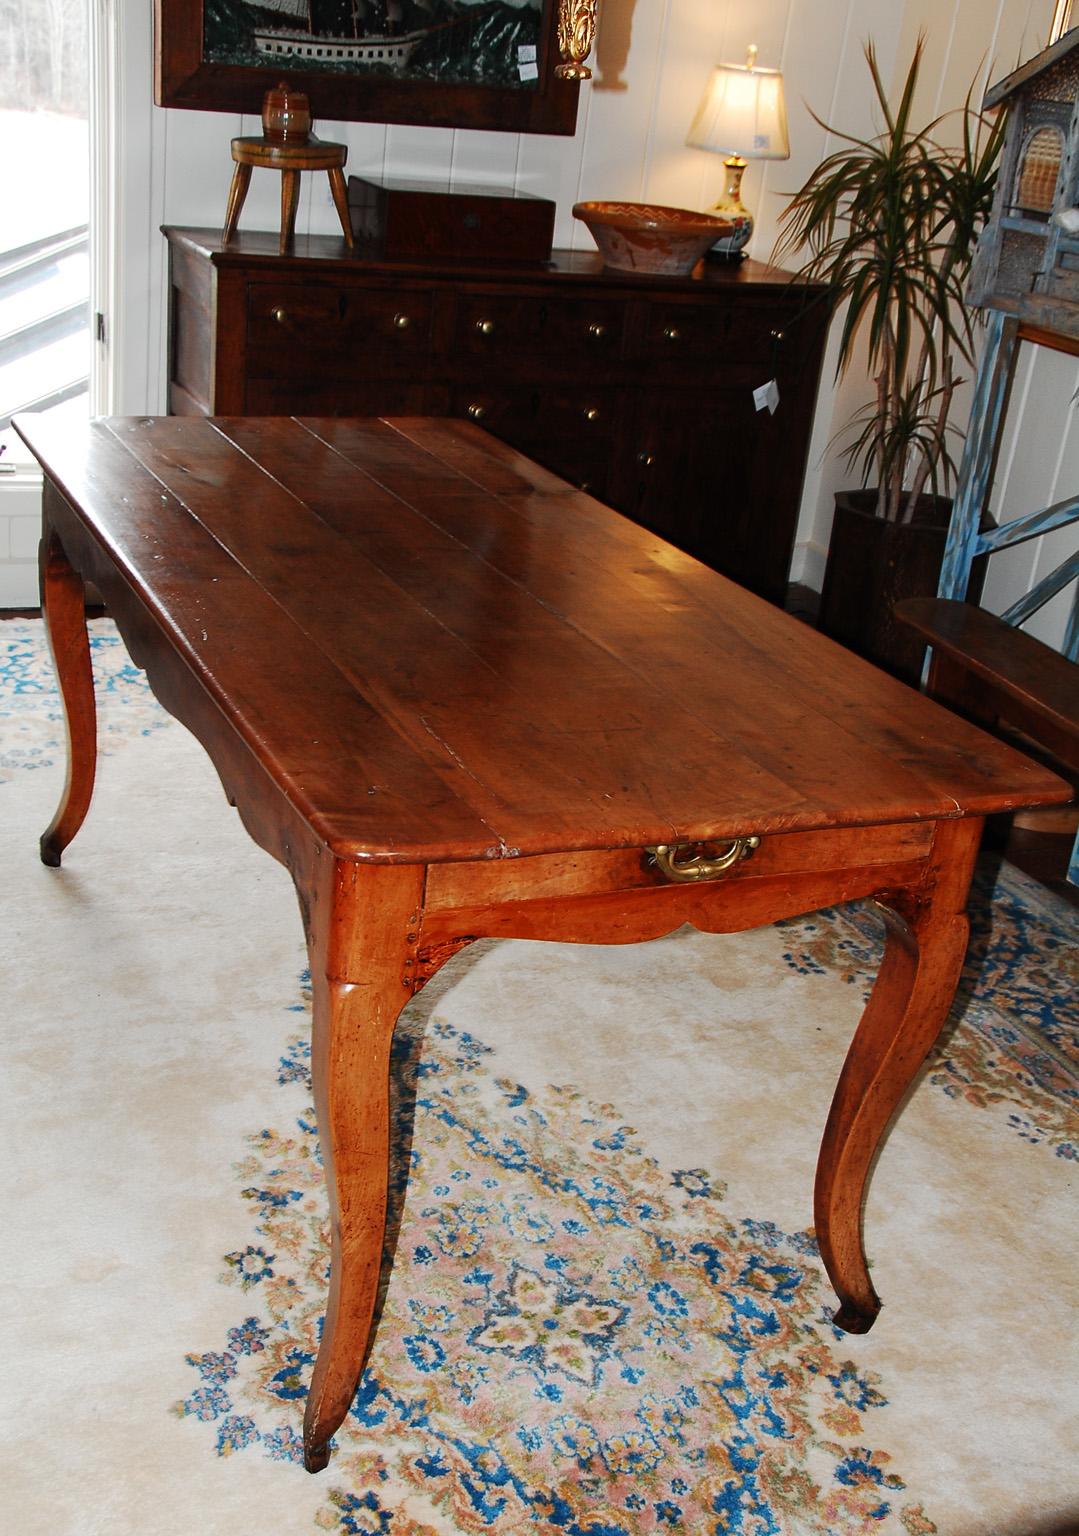 French Provincial French Early 19th Century Farmhouse Table in Cherry with Cabriole Legs